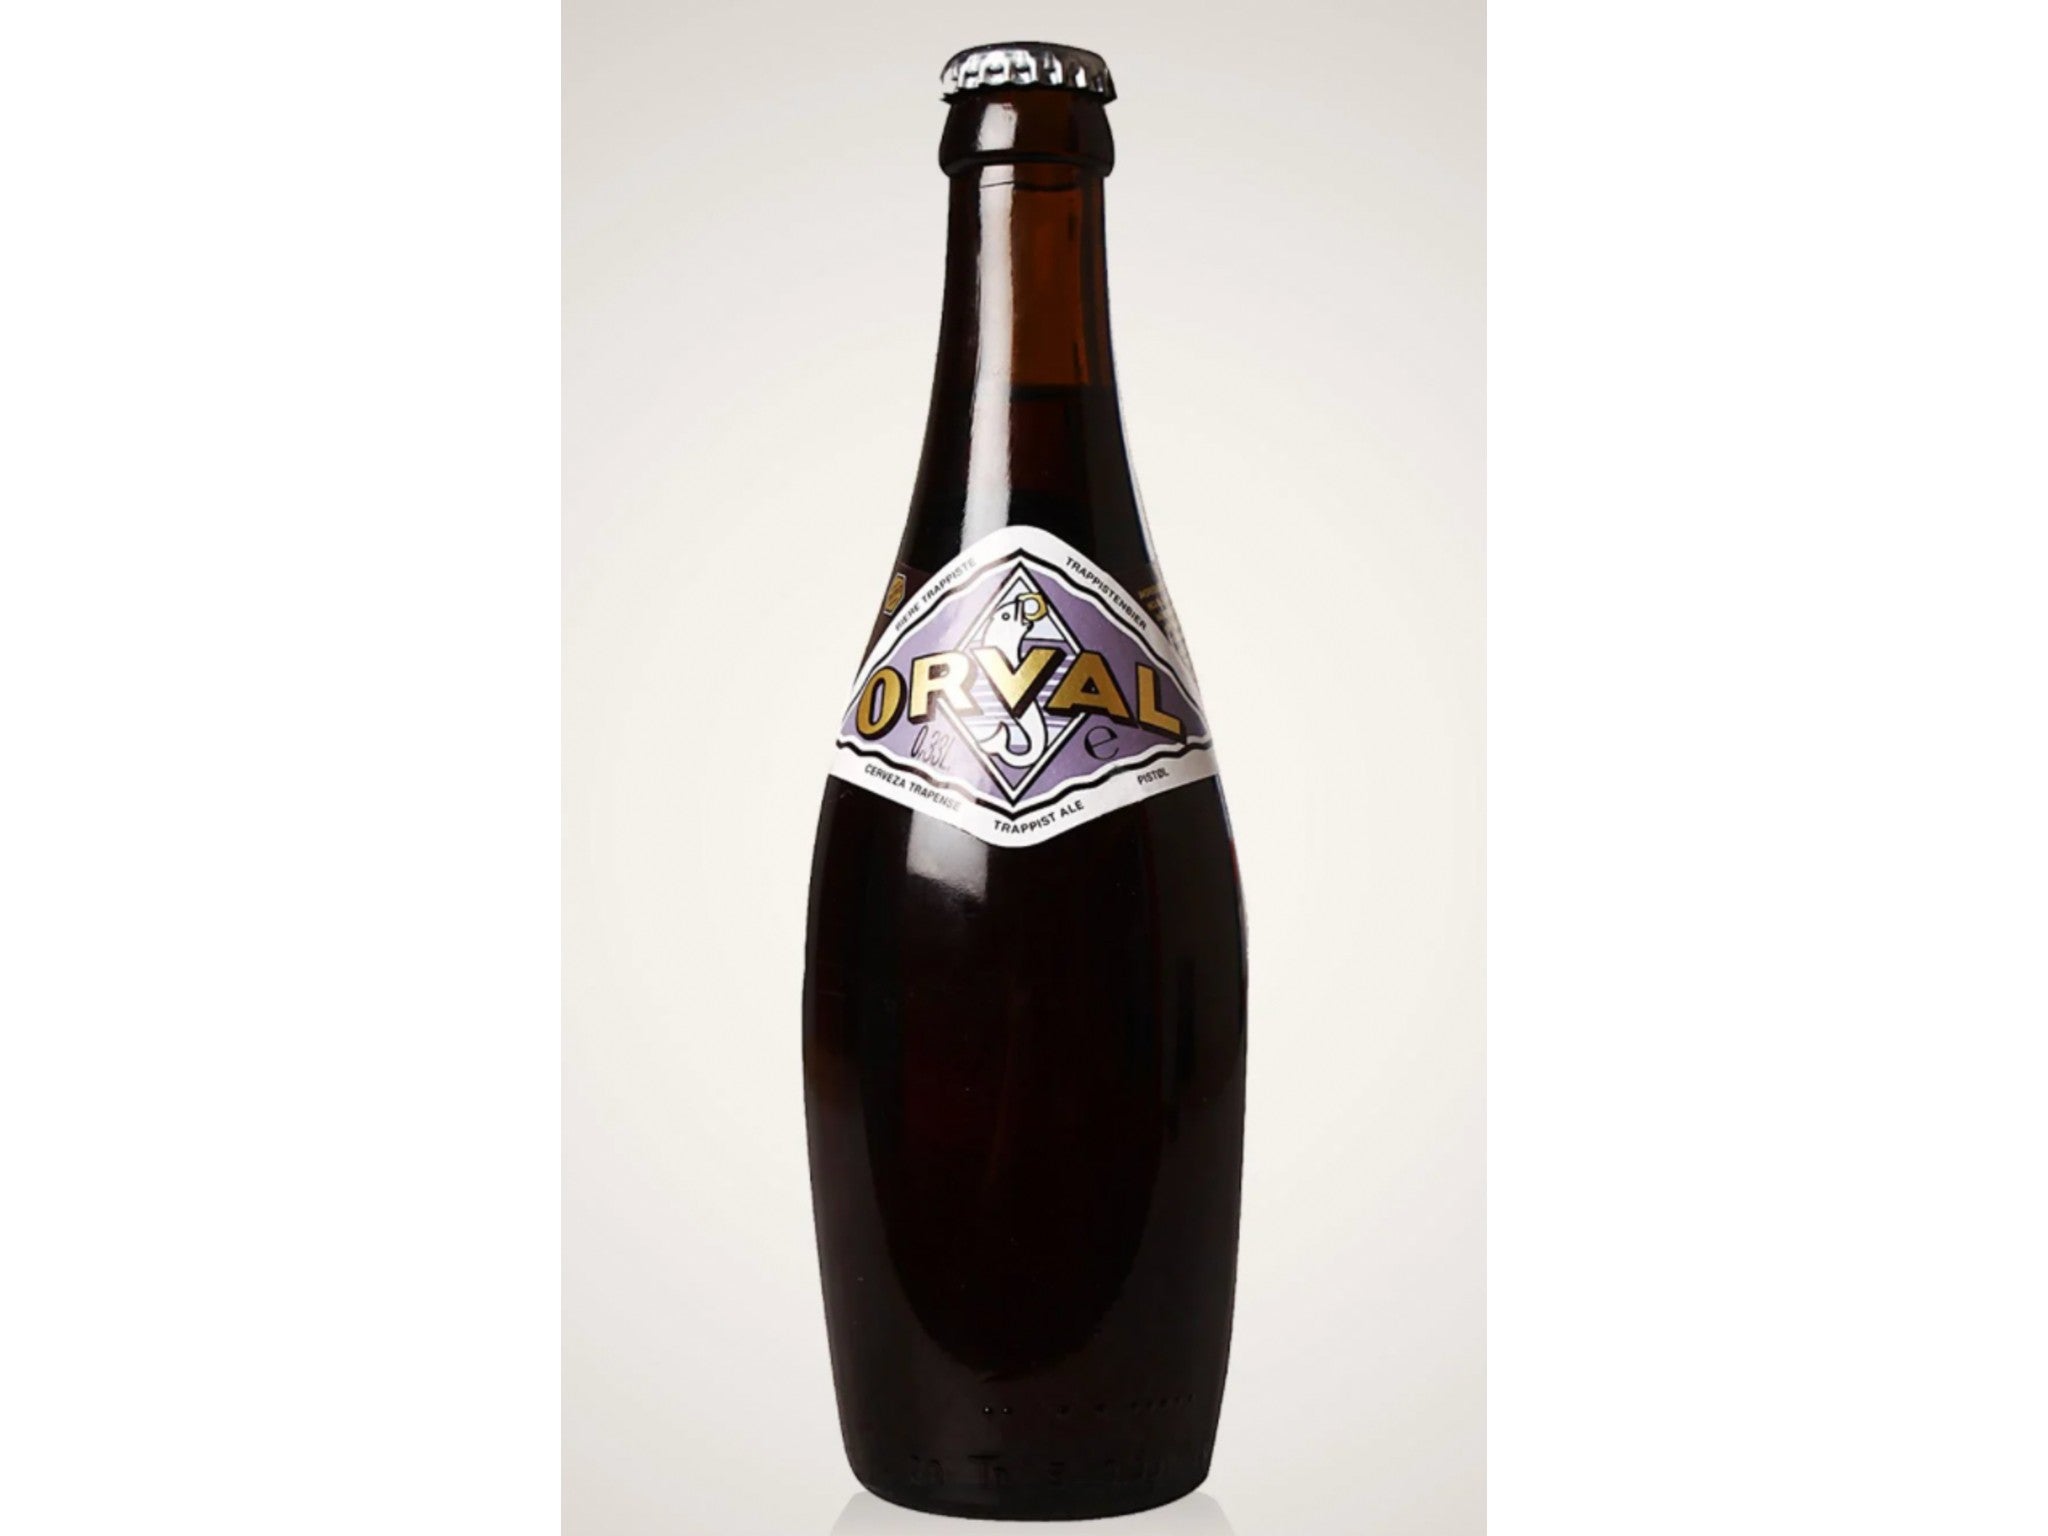 Orval wild trappist ale, 6.2%, 330ml indybest.jpg